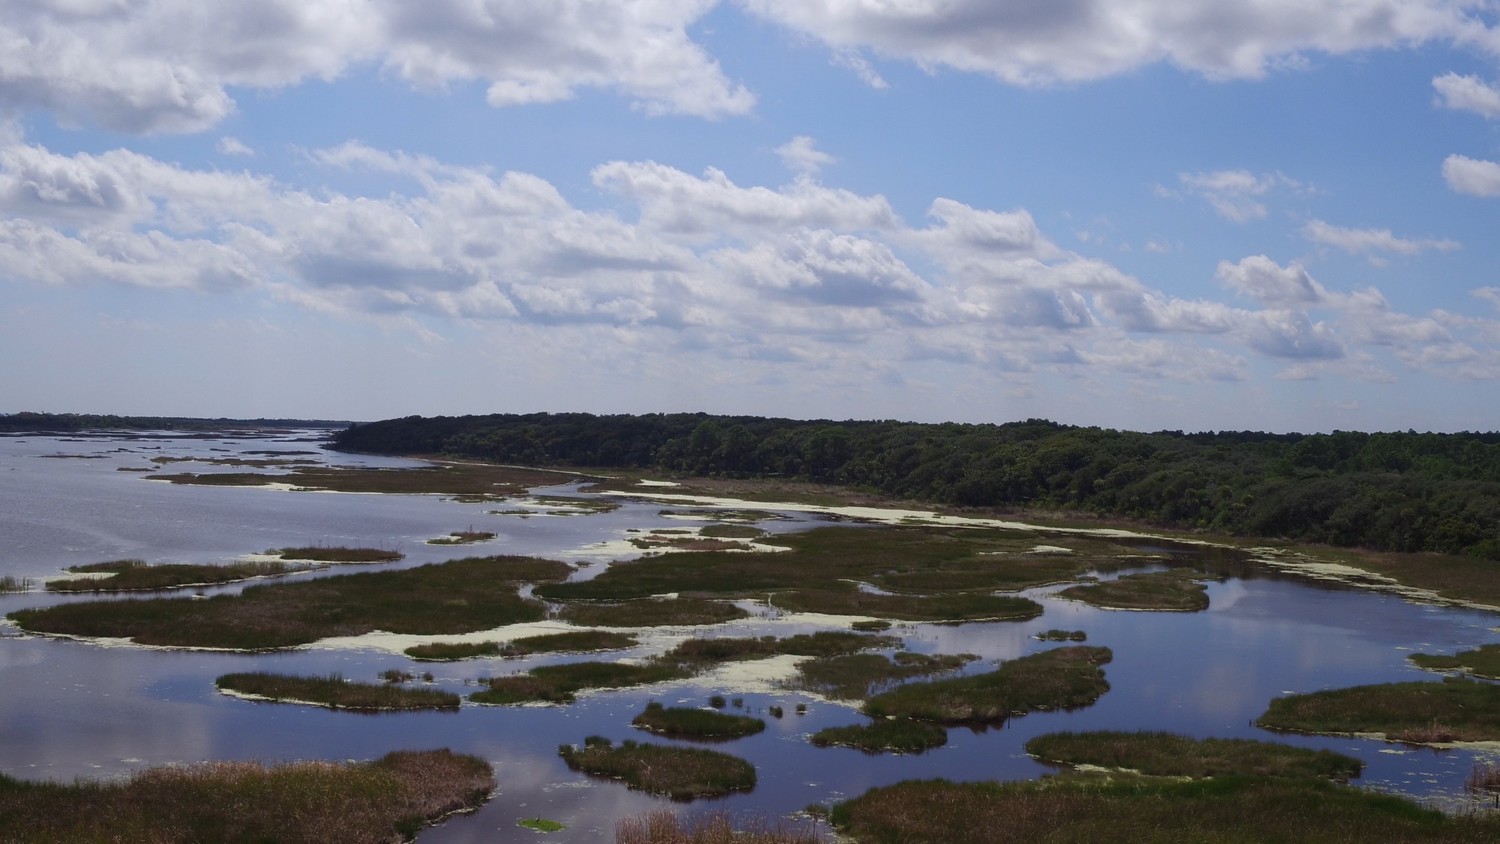 The Outpost property is located at the end of Neck Road and adjacent to the Guana Tolomato Matanzas National Estuarine Research Reserve.